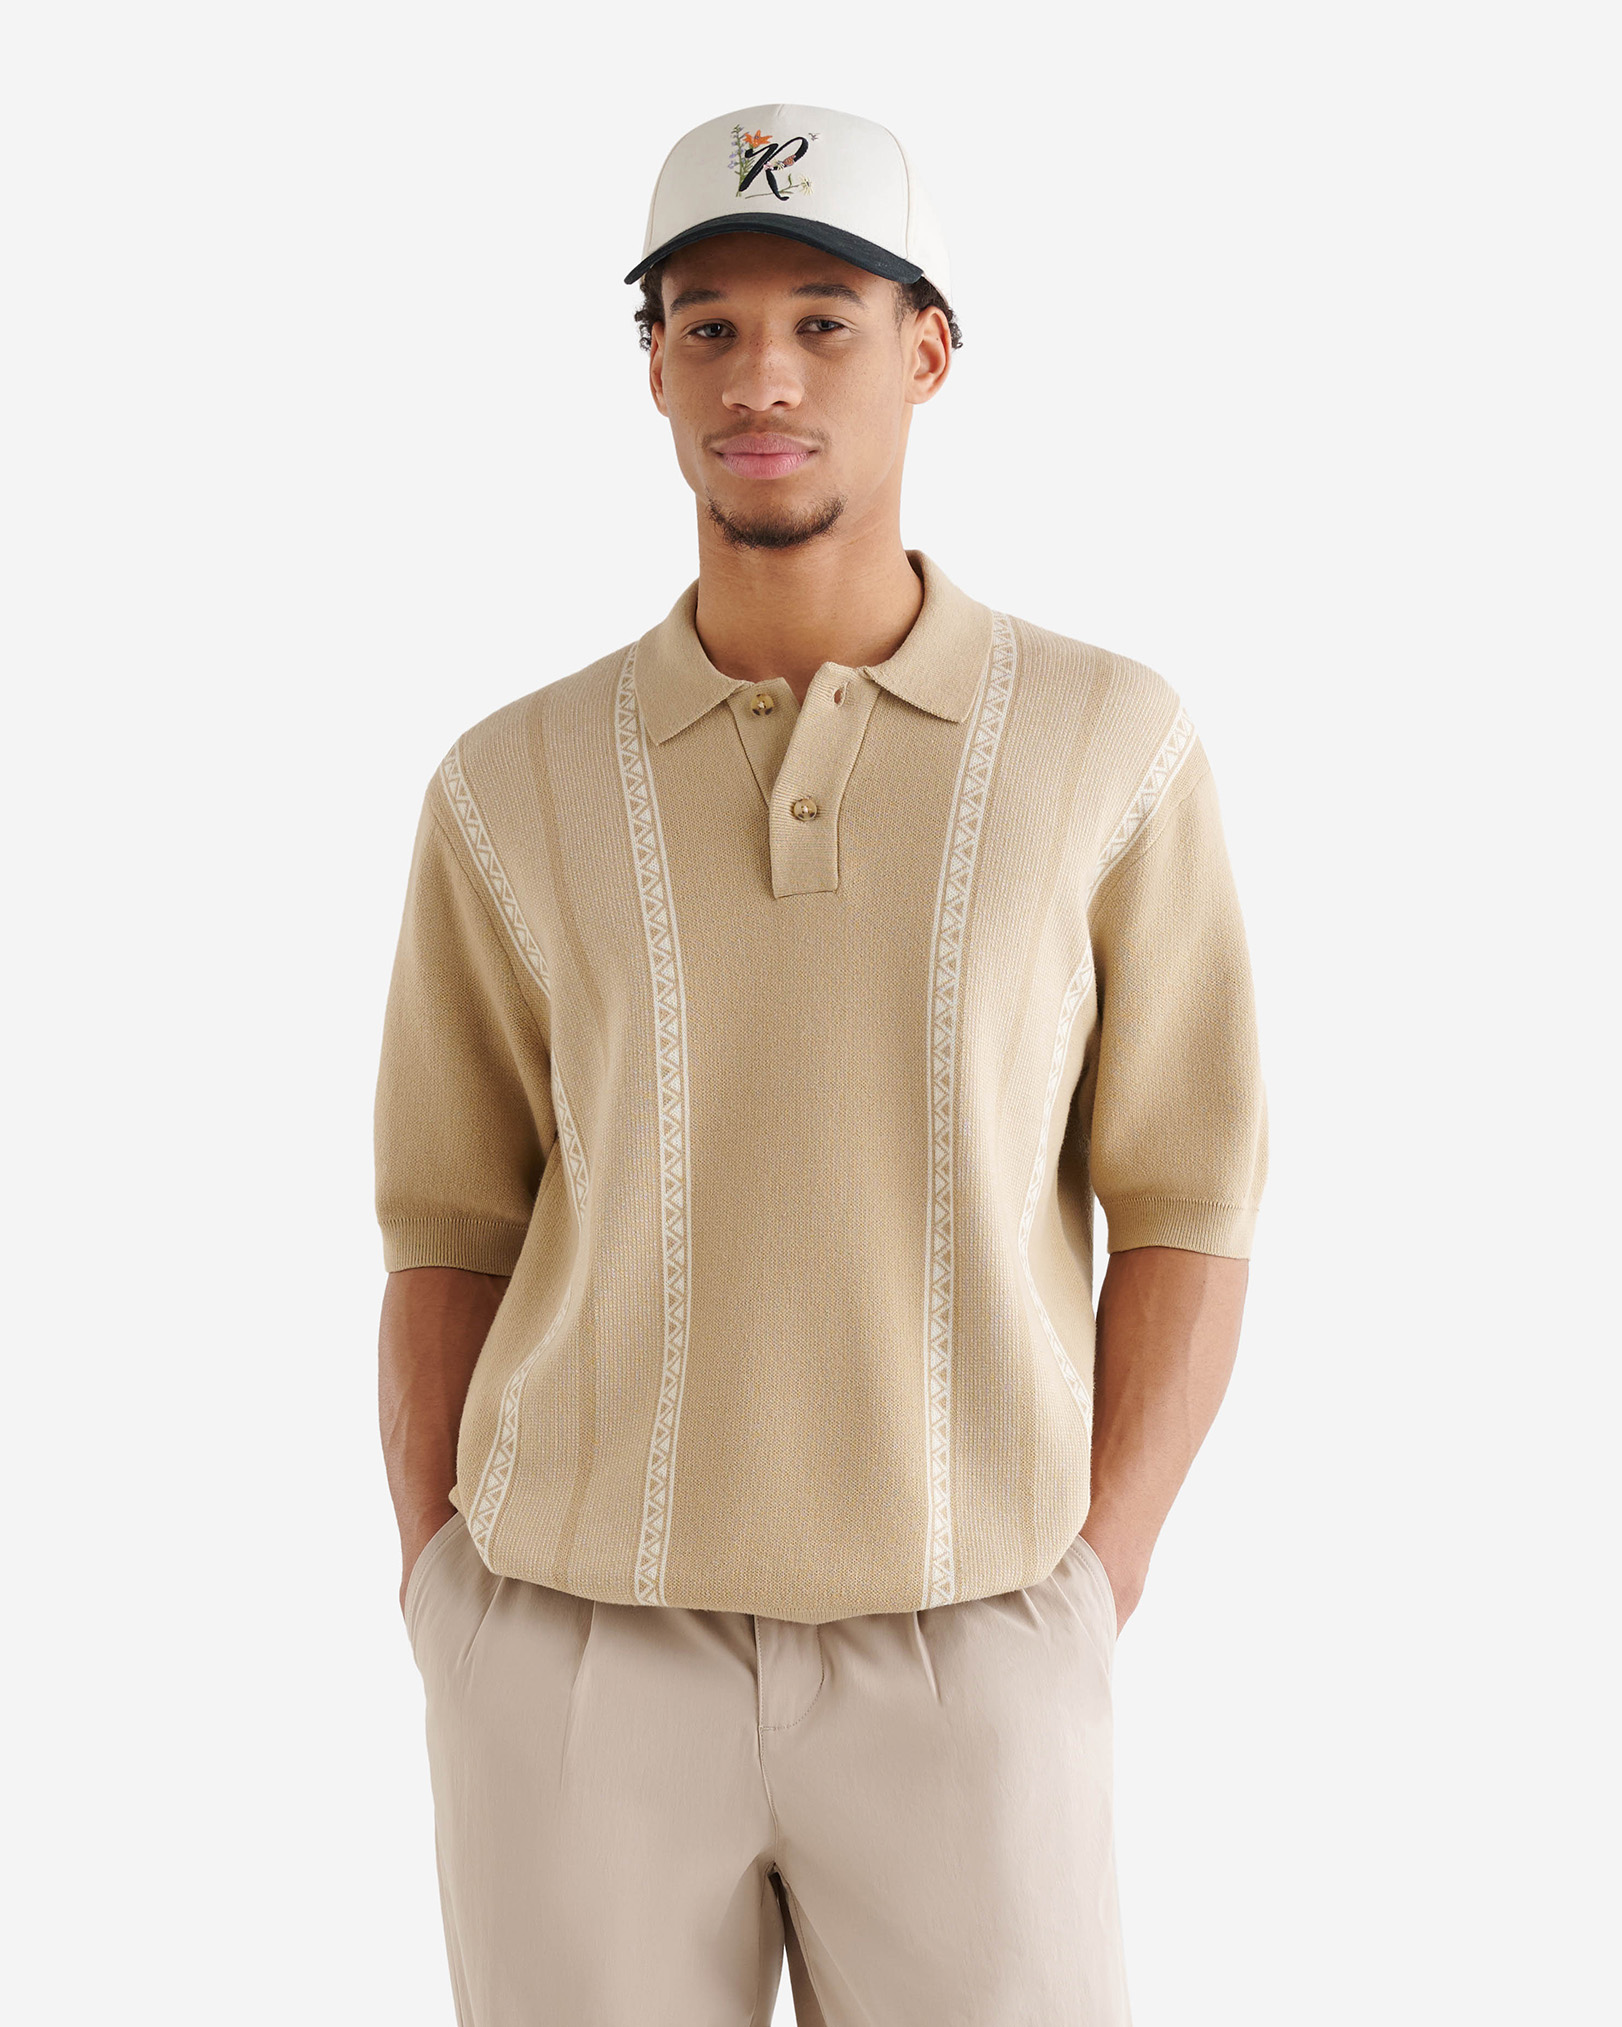 Roots Severn Sweater Polo Shirt in Fossil Sand